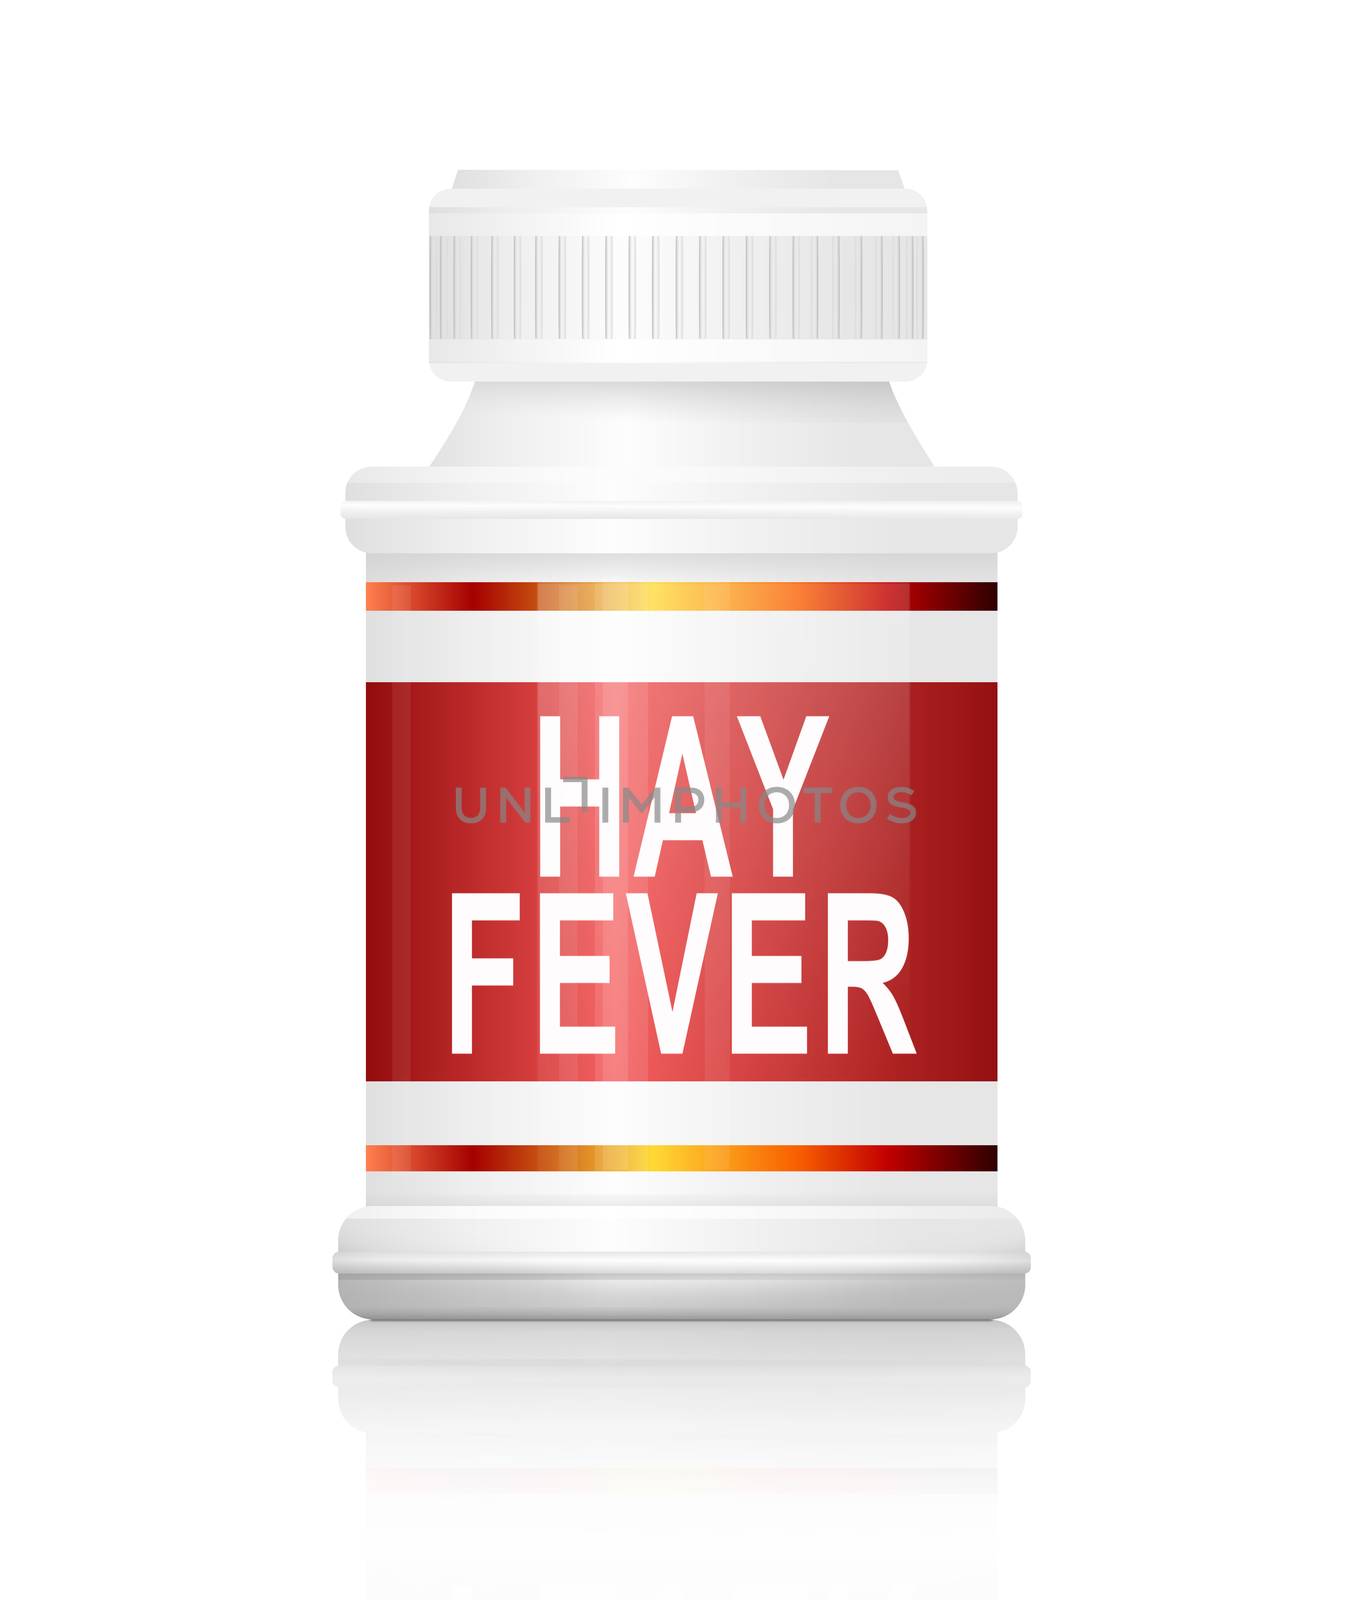 Illustration depicting a medication container with a Hay fever concept.